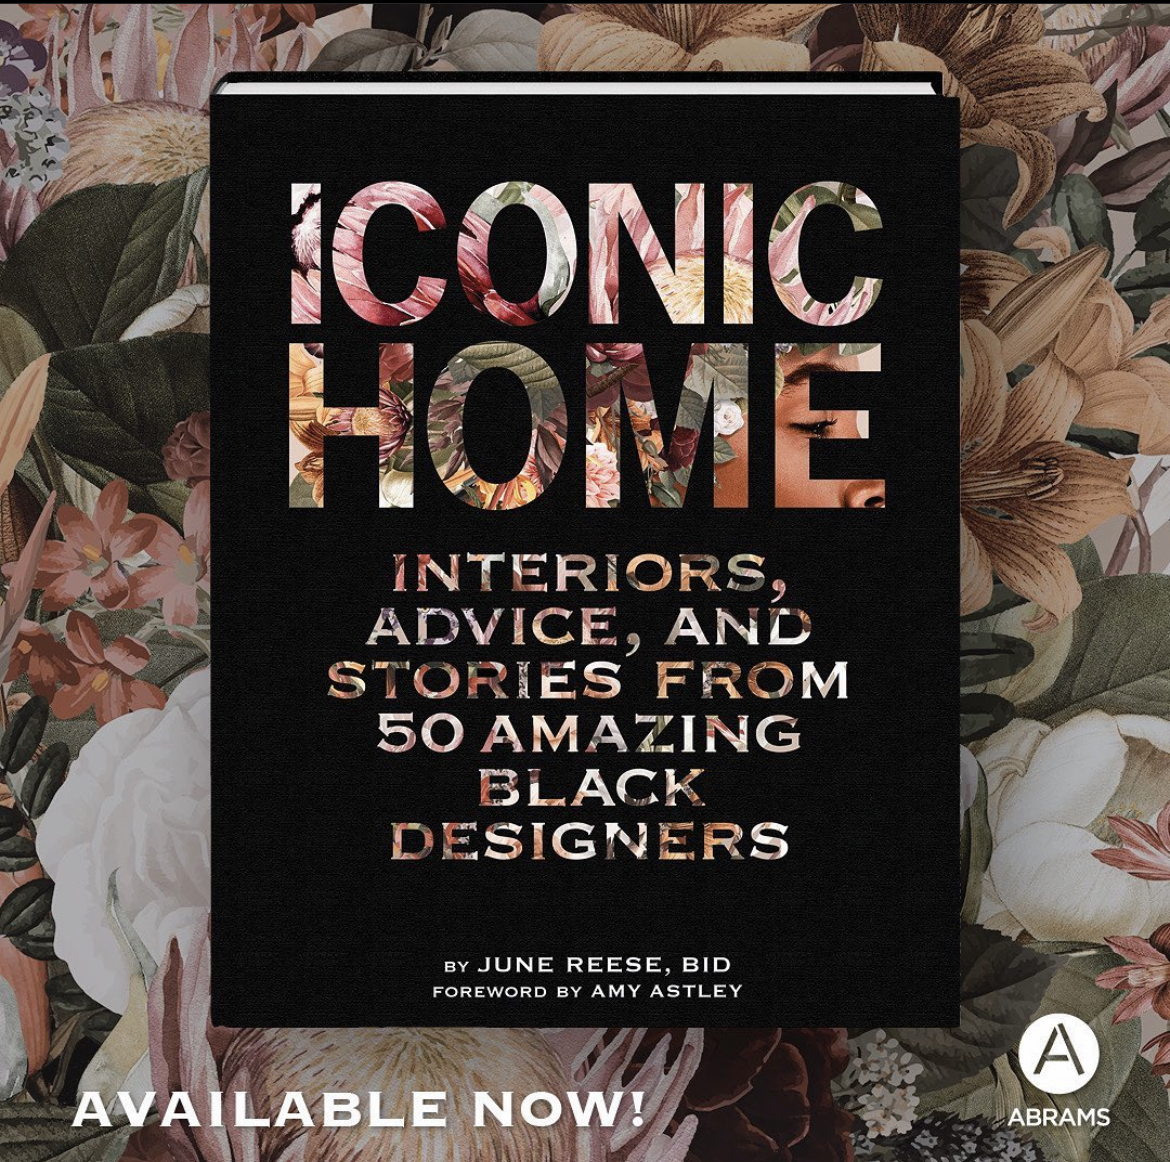 Iconic Home: Interiors, Advice, and Stories from 50 Amazing Black Designers by June Reese, BID